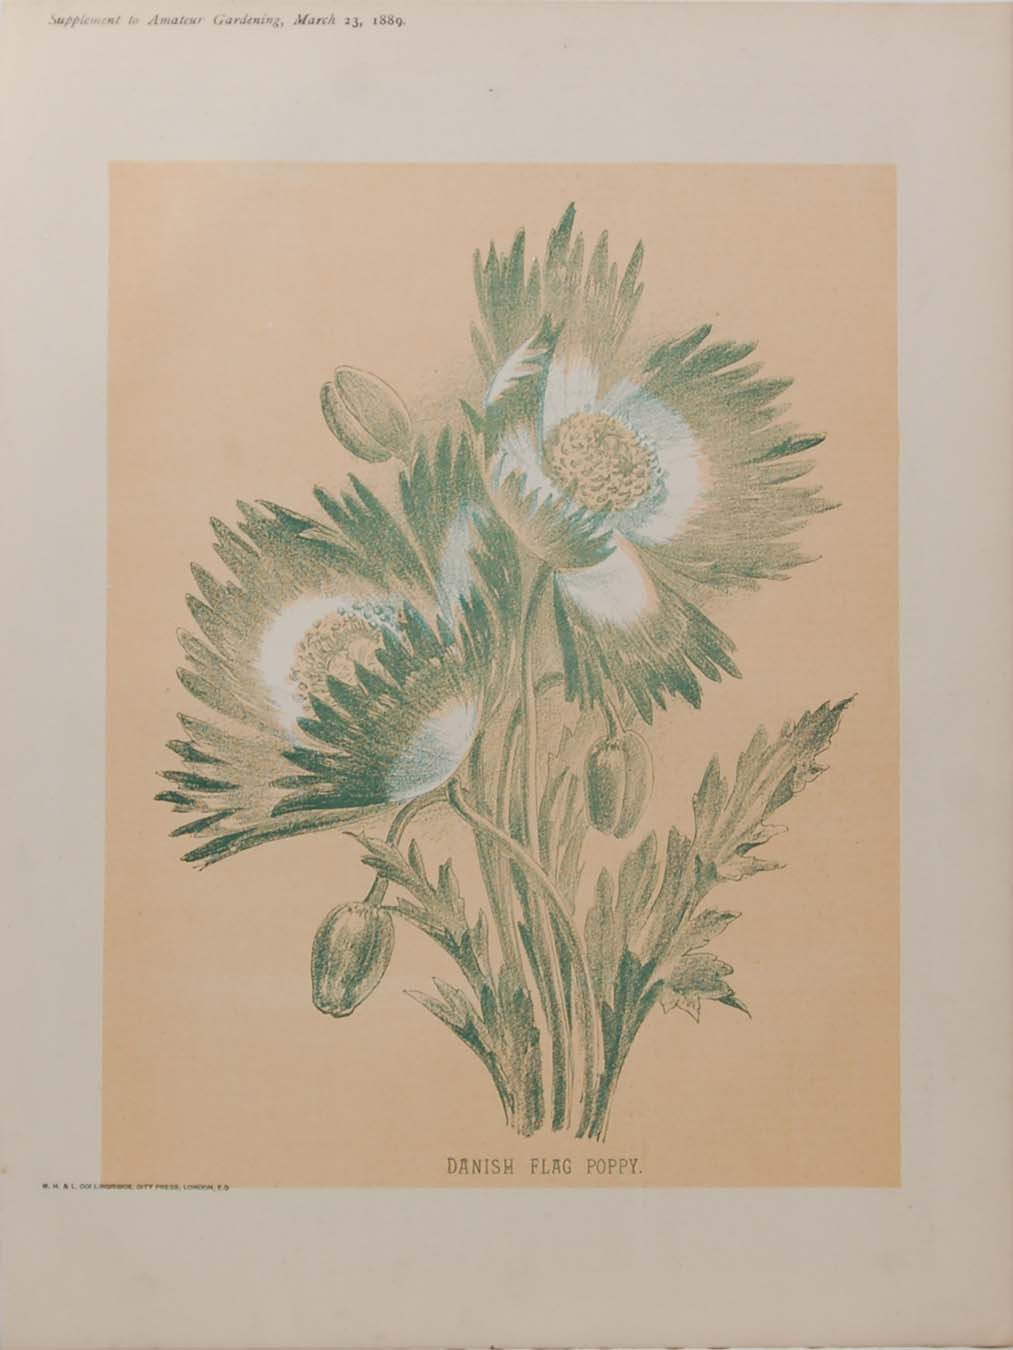 Antique botanical print, Victorian, titled Danish Flag Poppy. The print a chromolithograph was published by W H & L Collingridge in 1889.